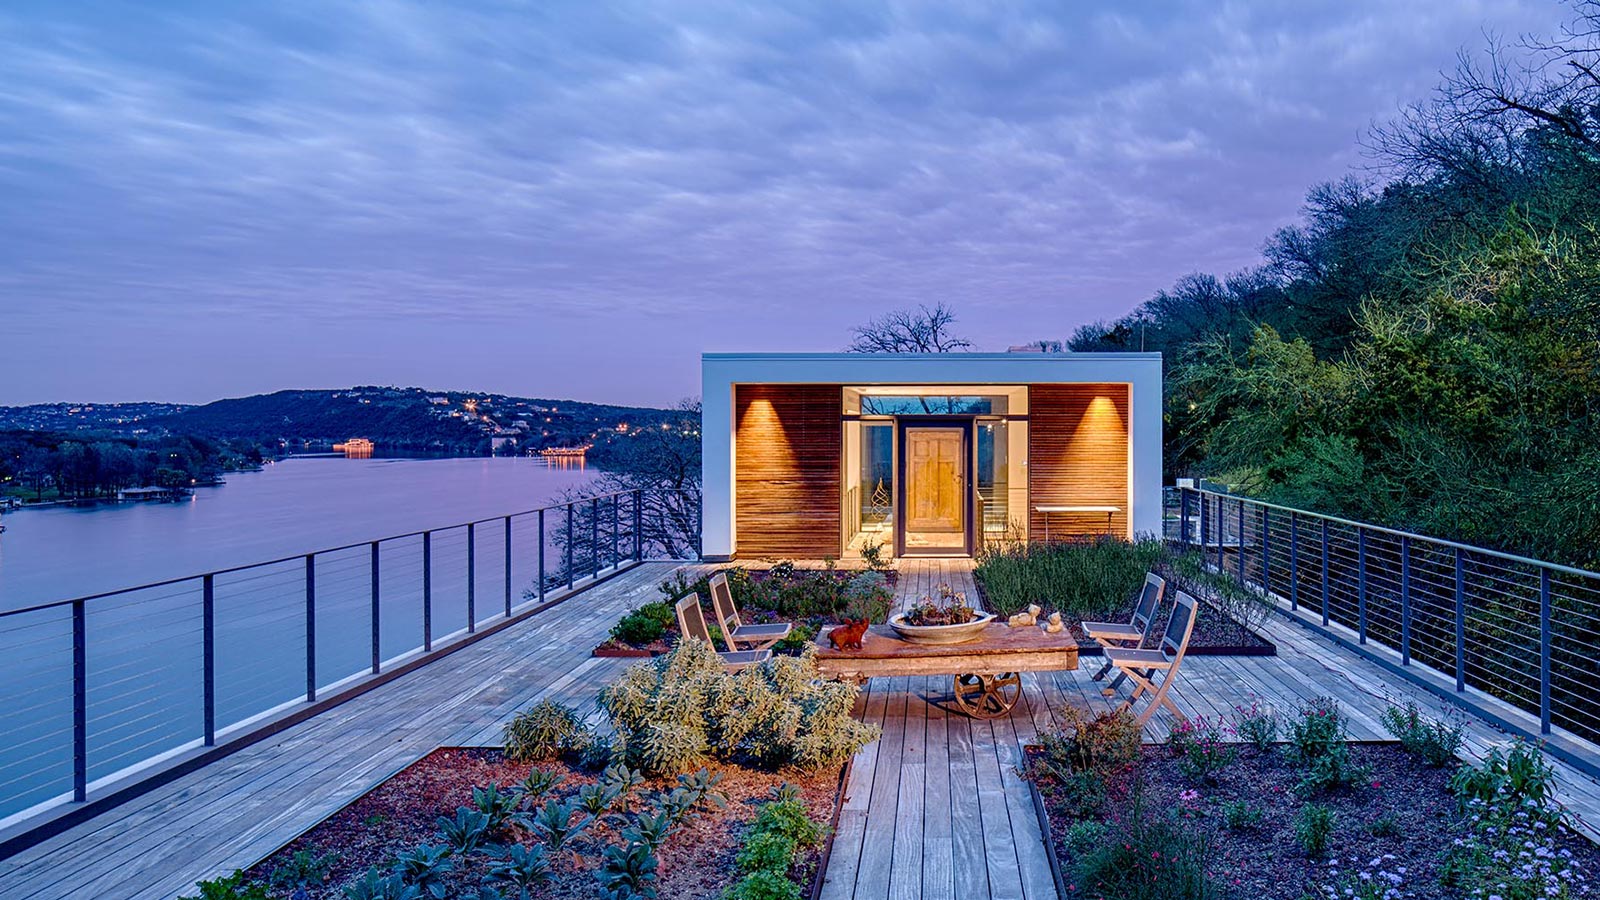 From 1970s classic house to spectacular modern cliff dwelling in Austin, Texas by Specht Architects